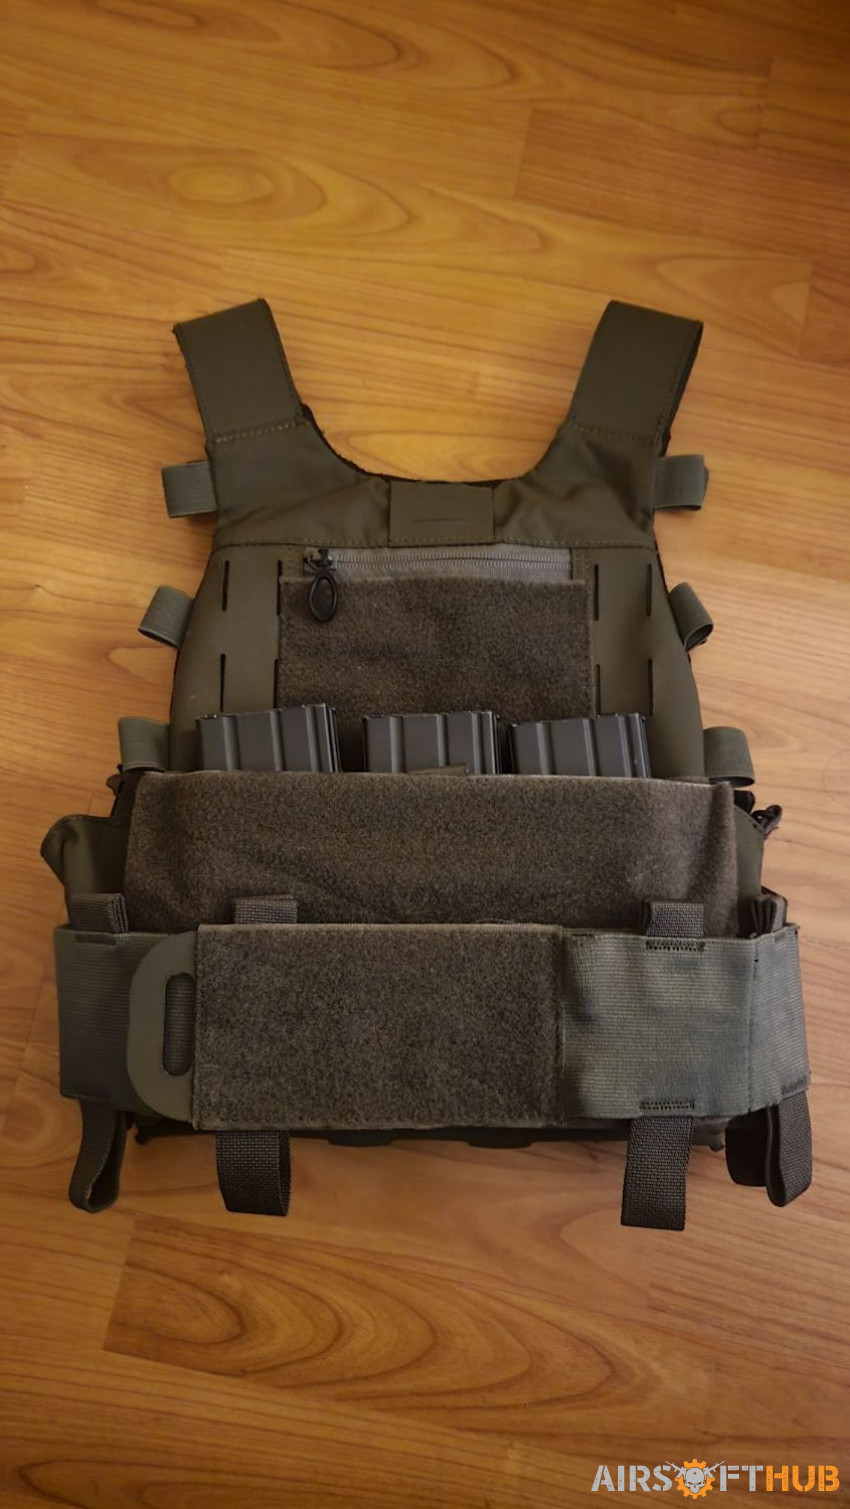 Price Drop! Advanced Slickster - Used airsoft equipment